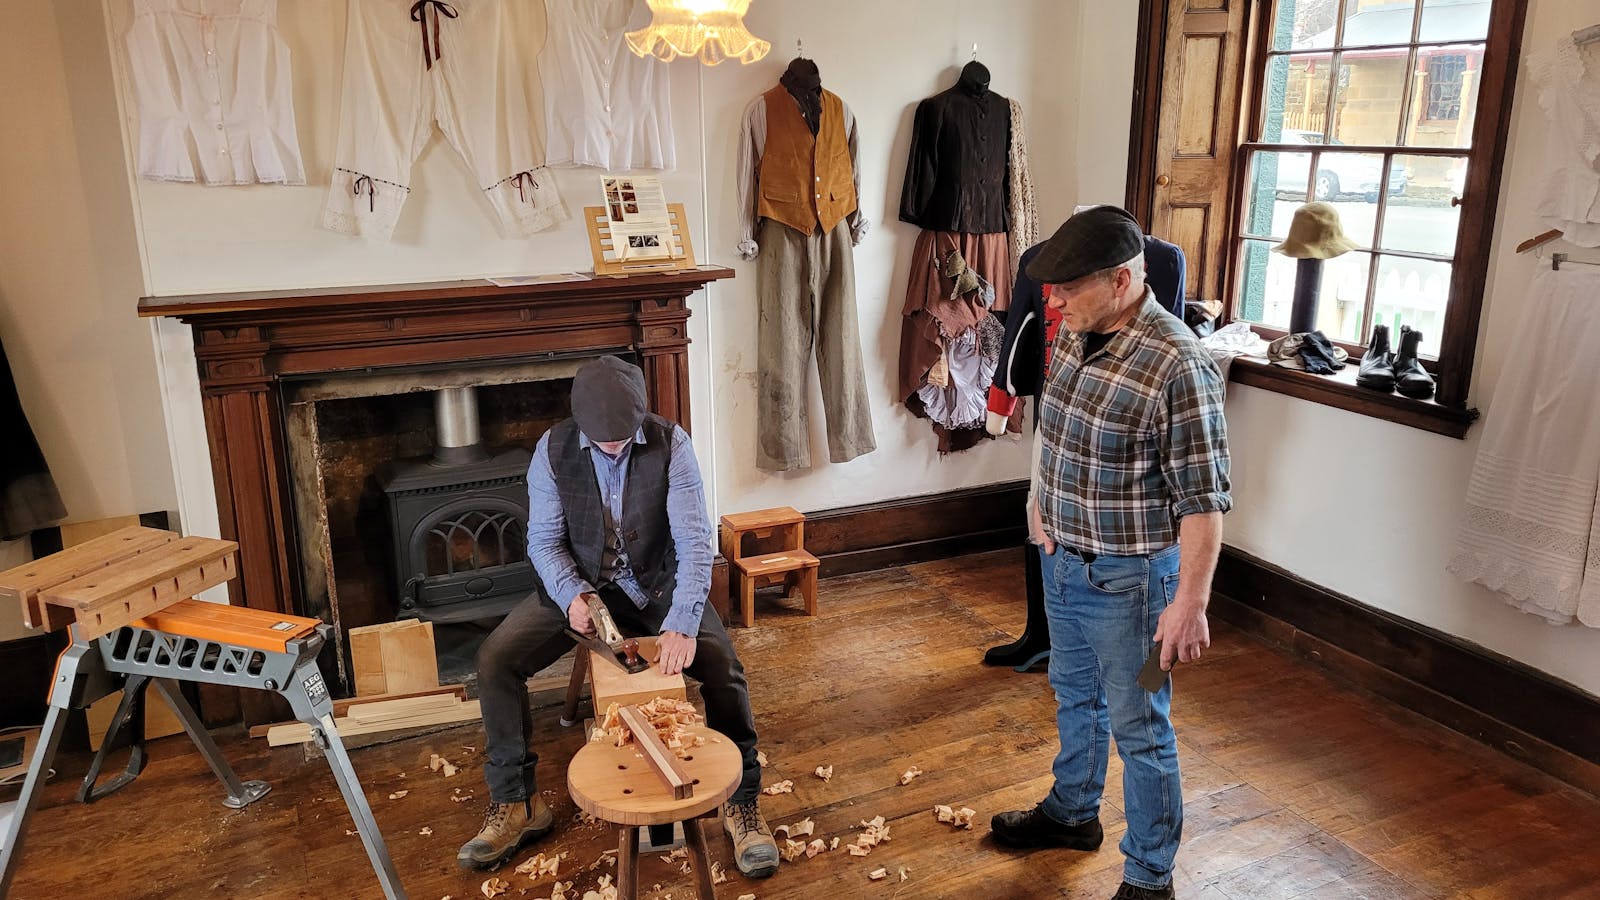 Heritage artisans like Johnny Mackay making handmade items from natural materials in the gallery.